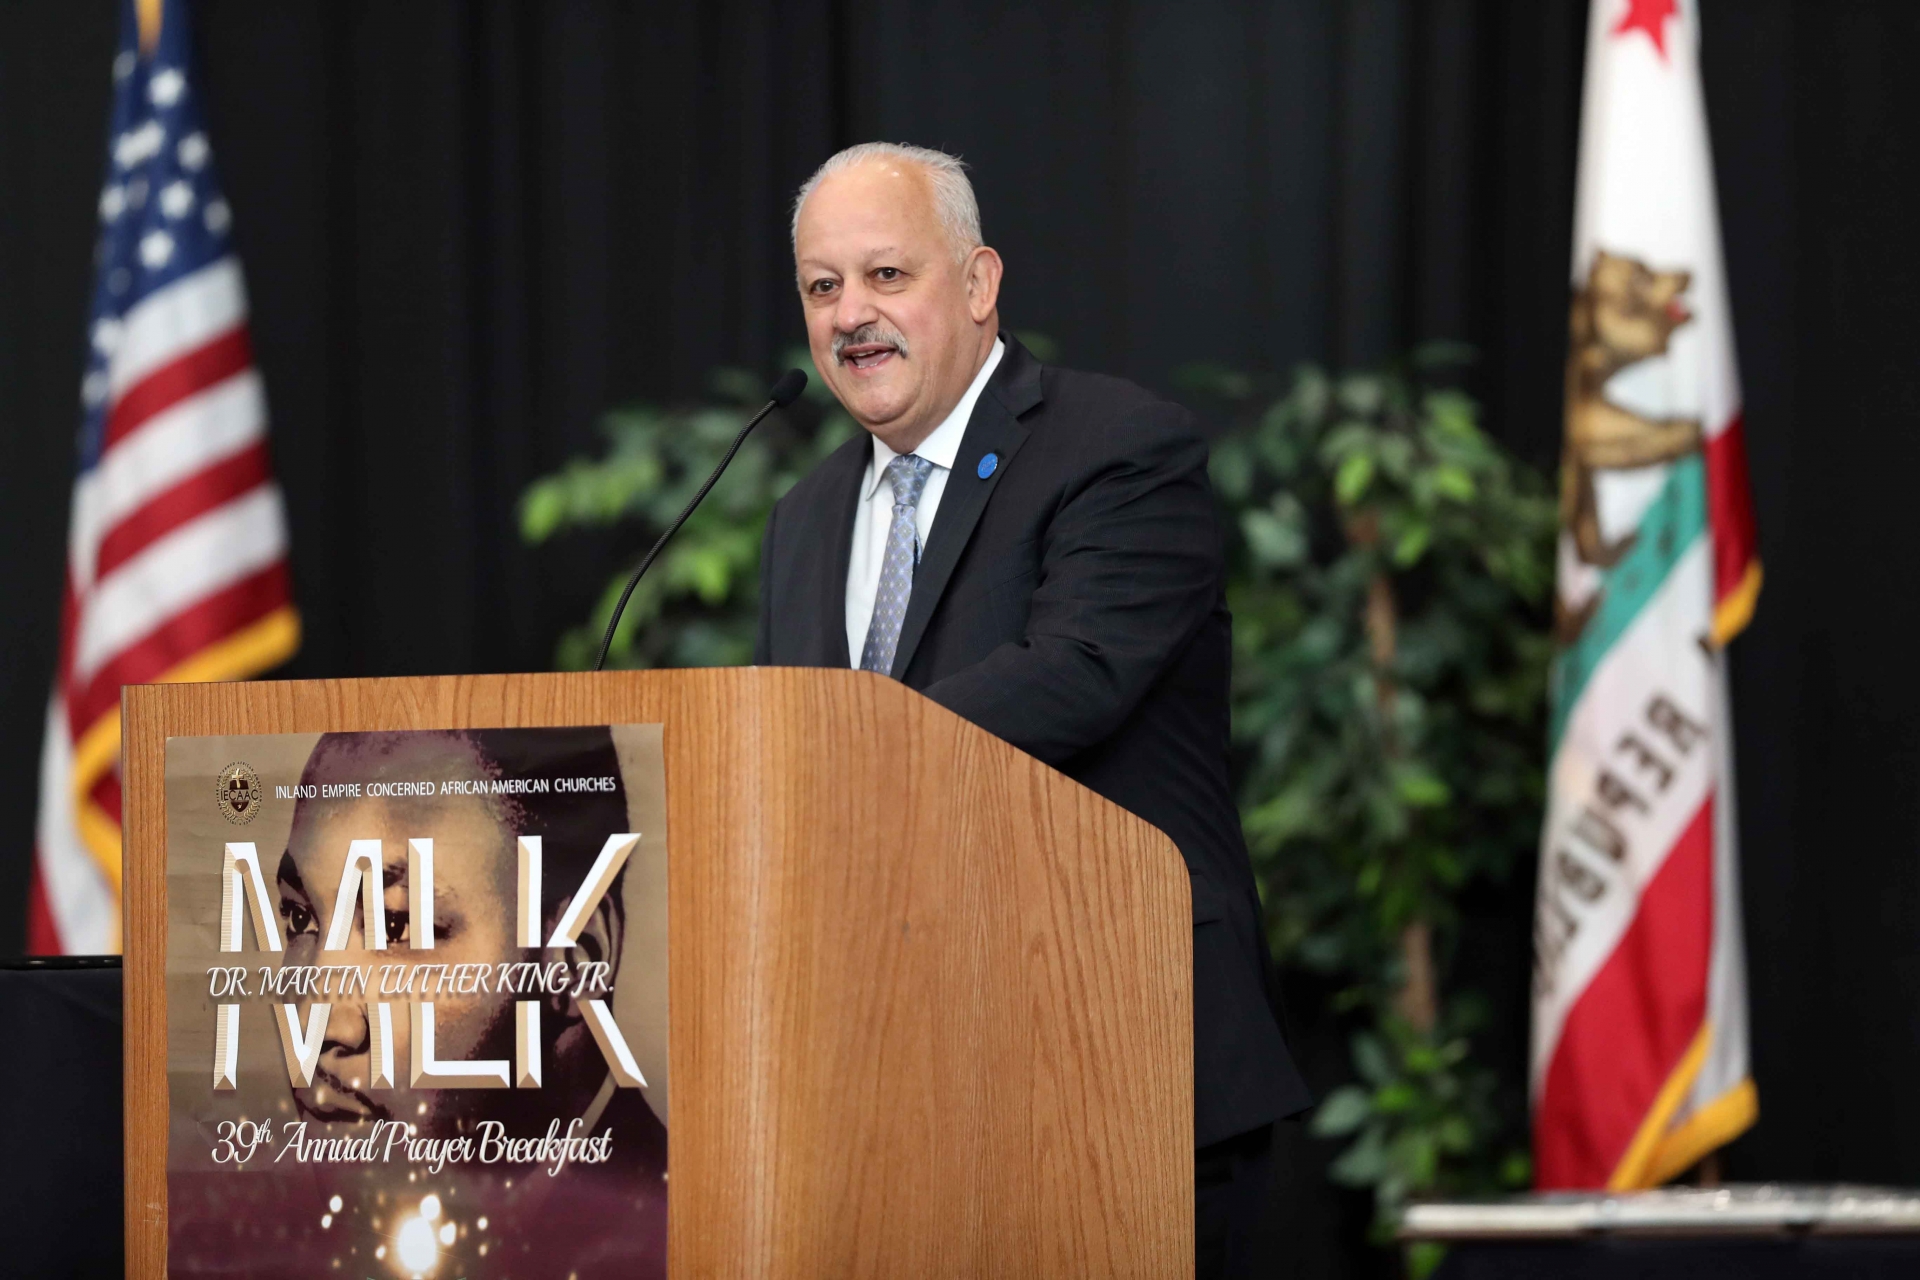 Tomás D. Morales, president of CSUSB, speaks at the 39th Annual Martin Luther King Jr. Prayer Breakfast.